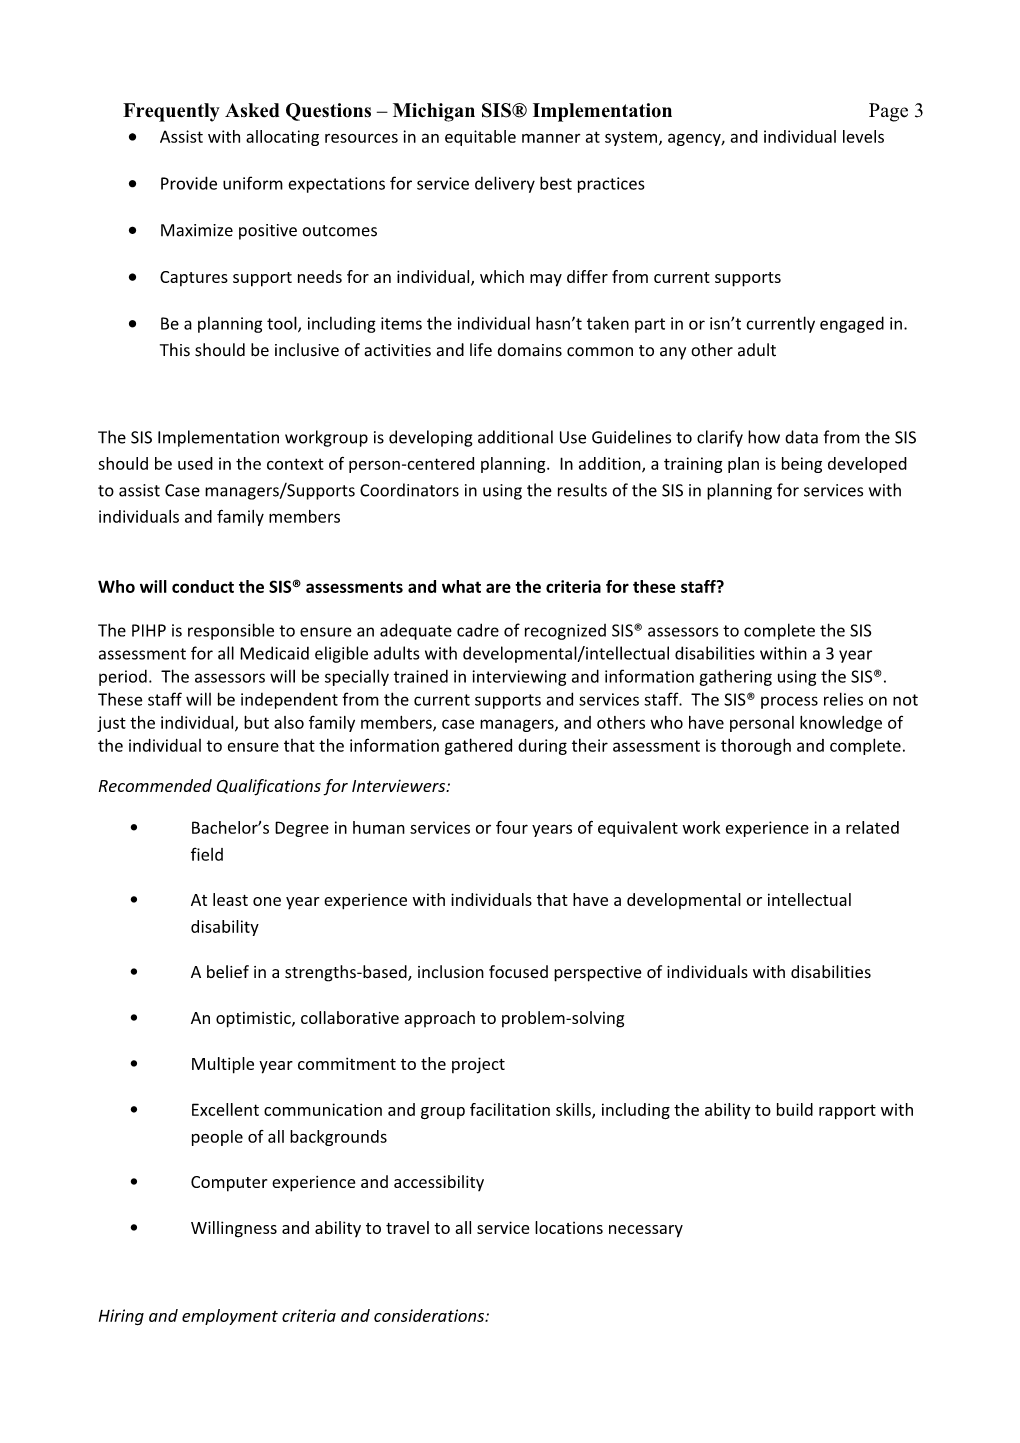 Frequently Asked Questions Michigan SIS Implementation Page 8